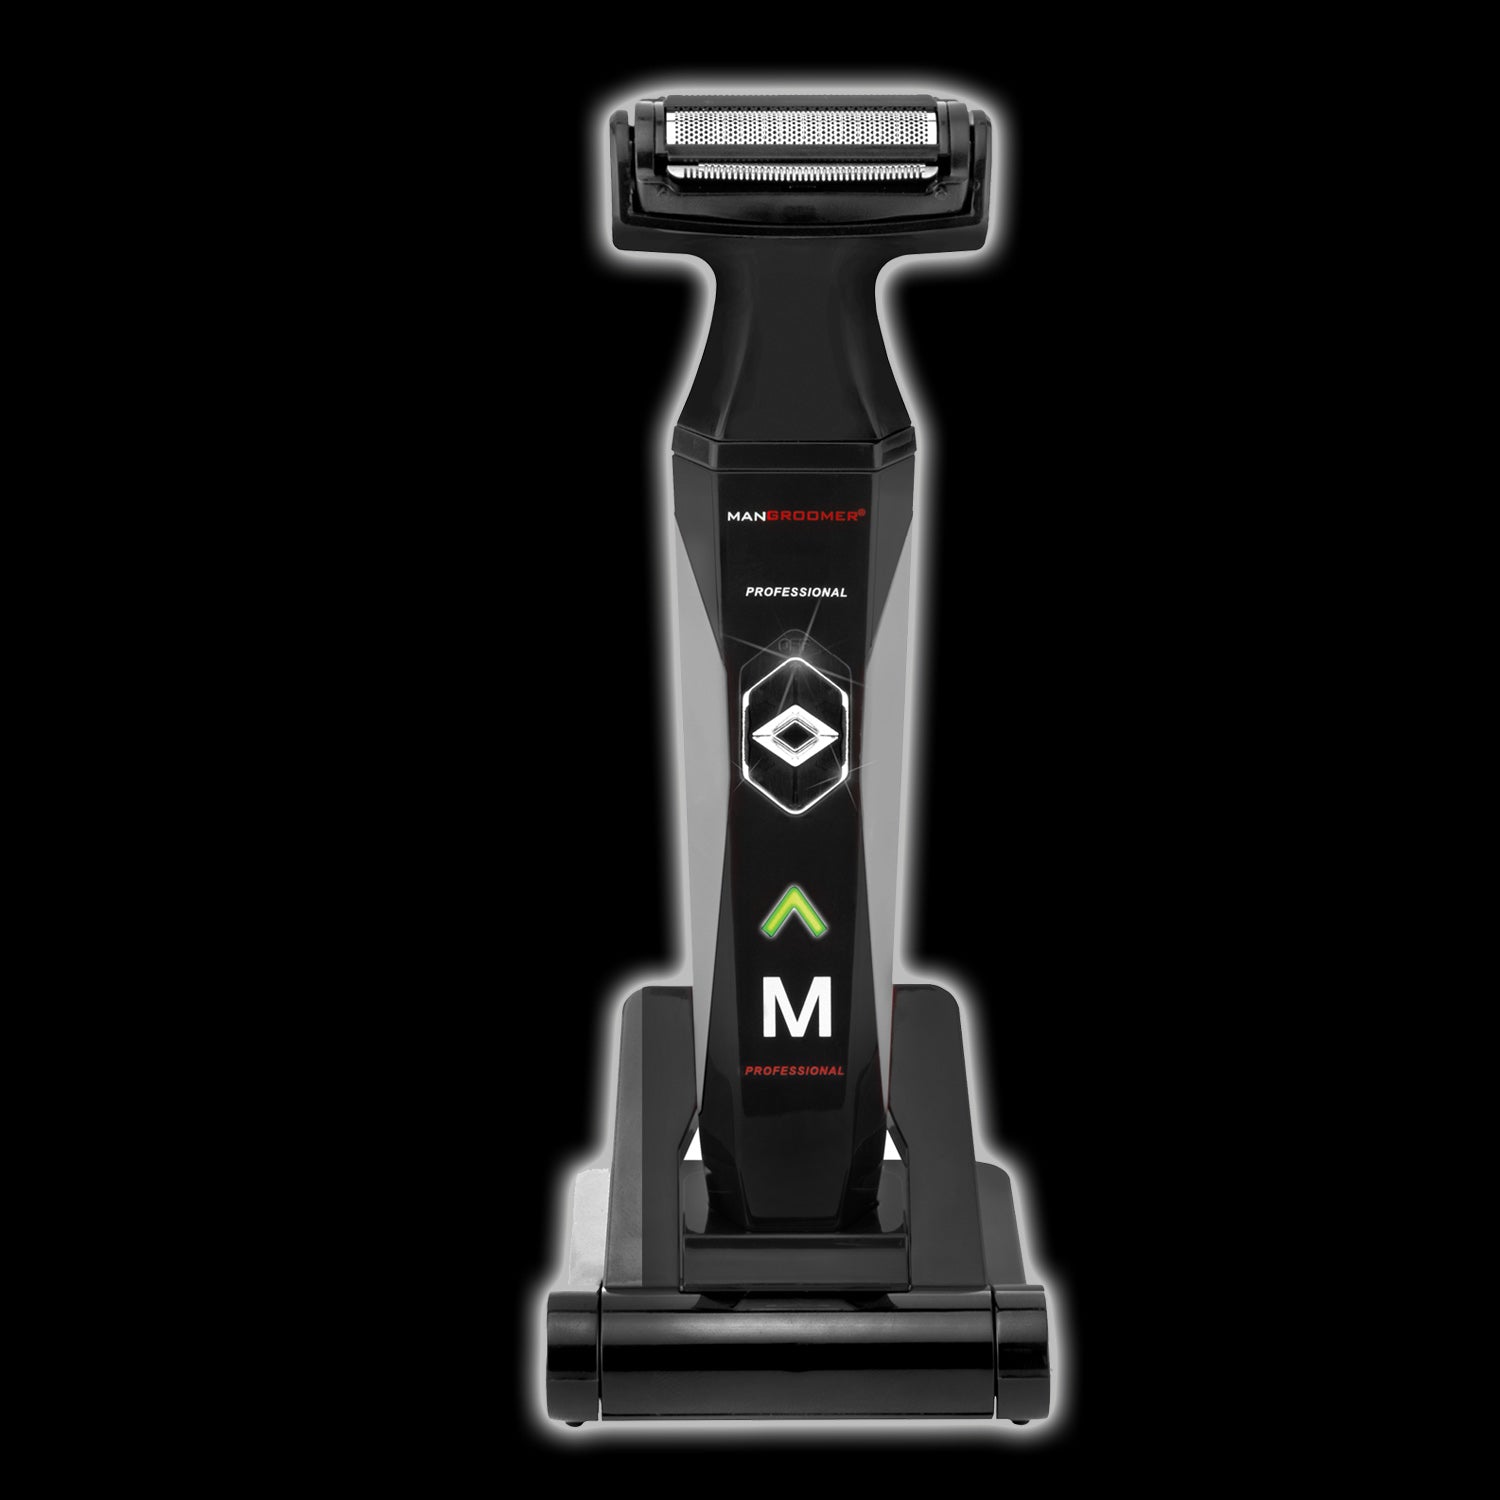 MANGROOMER PROFESSIONAL Body Groomer and Trimmer, Wet or Dry